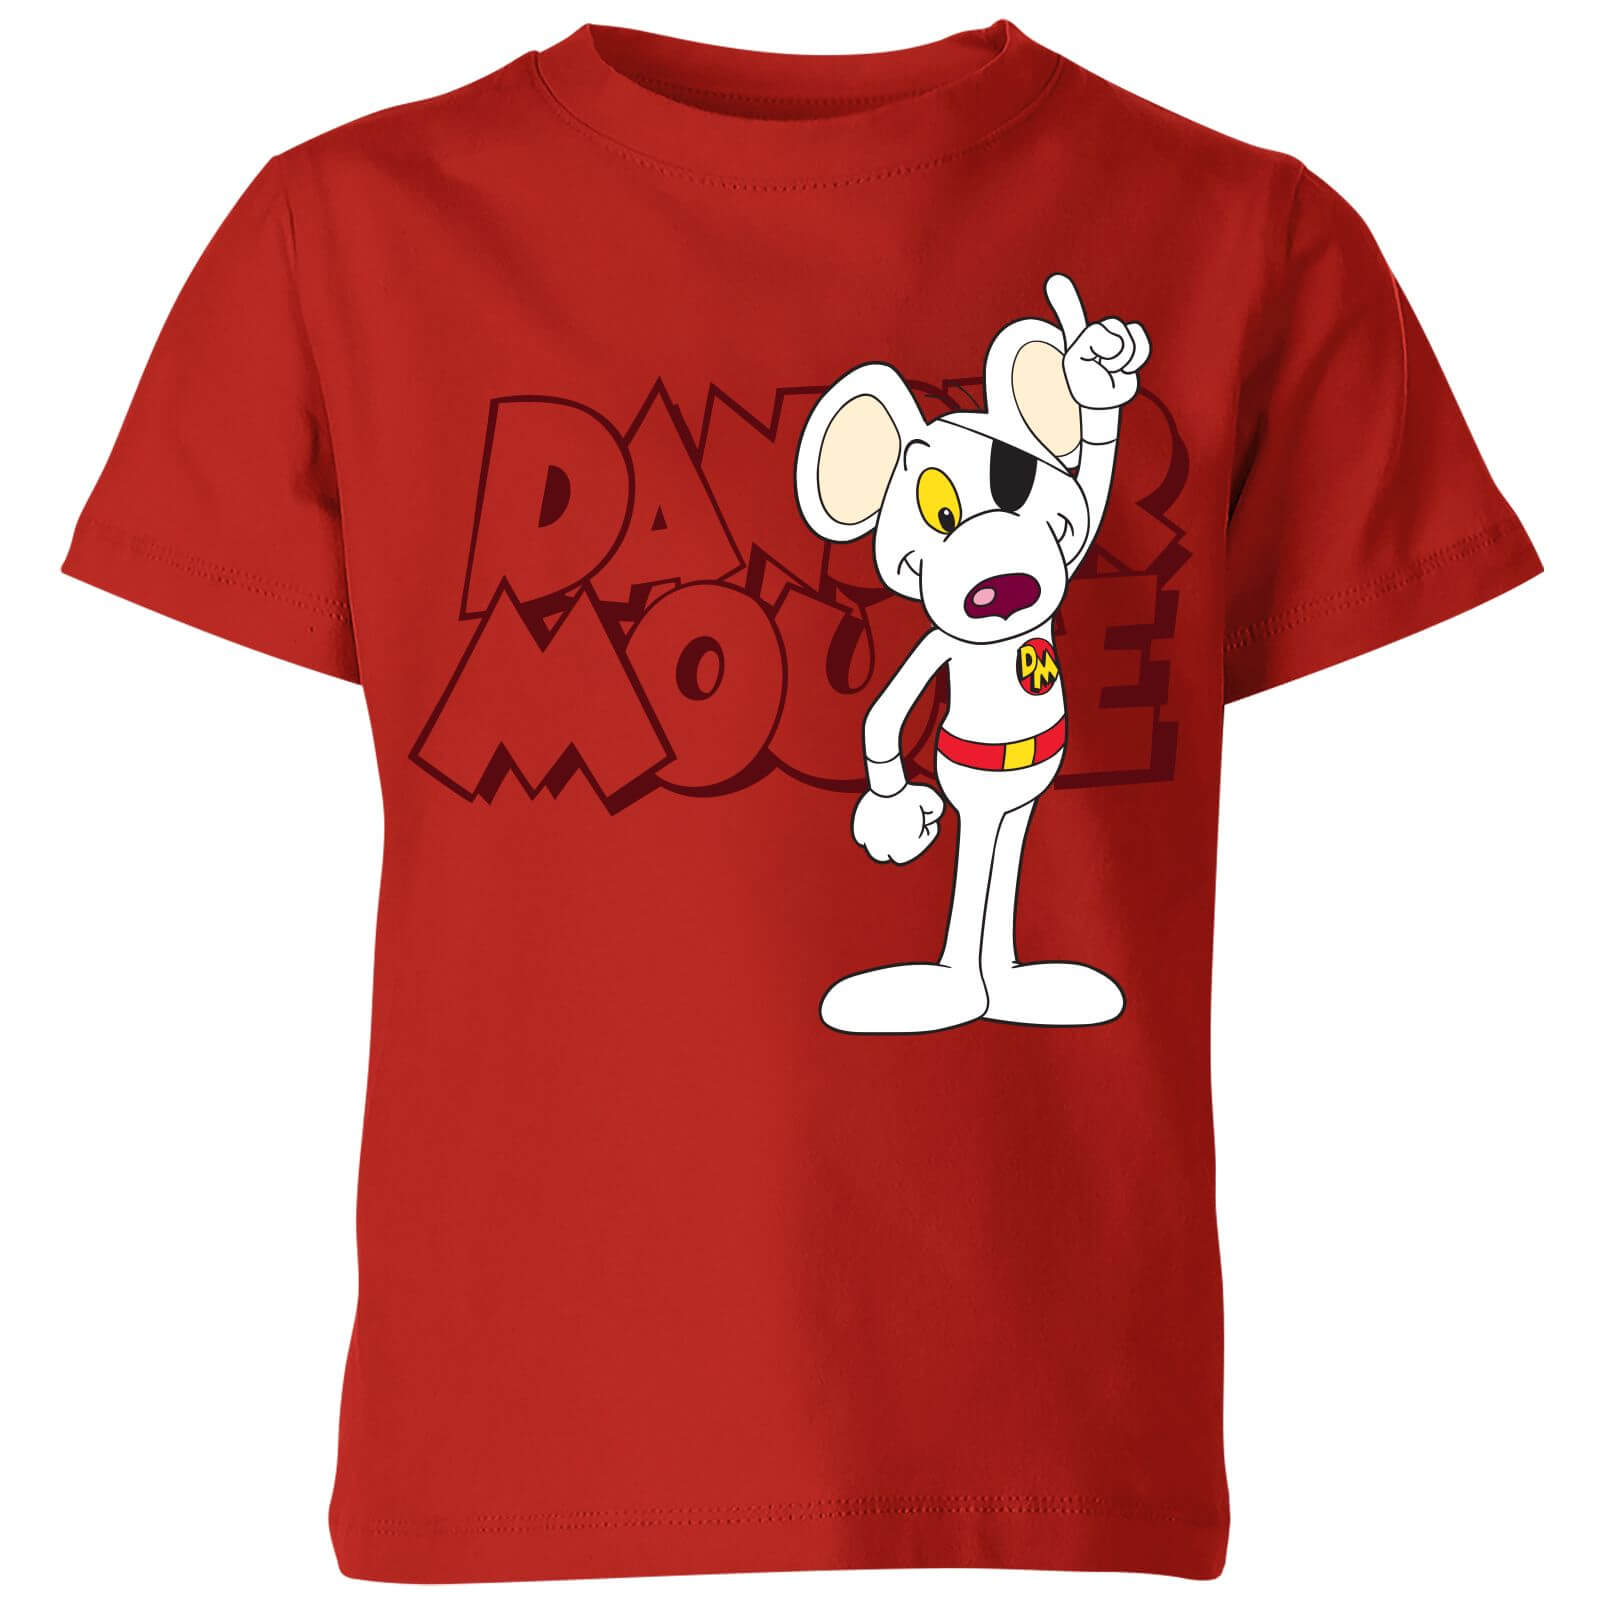 Danger Mouse Pose Kids' T-Shirt - Red - 5-6 Years - Red